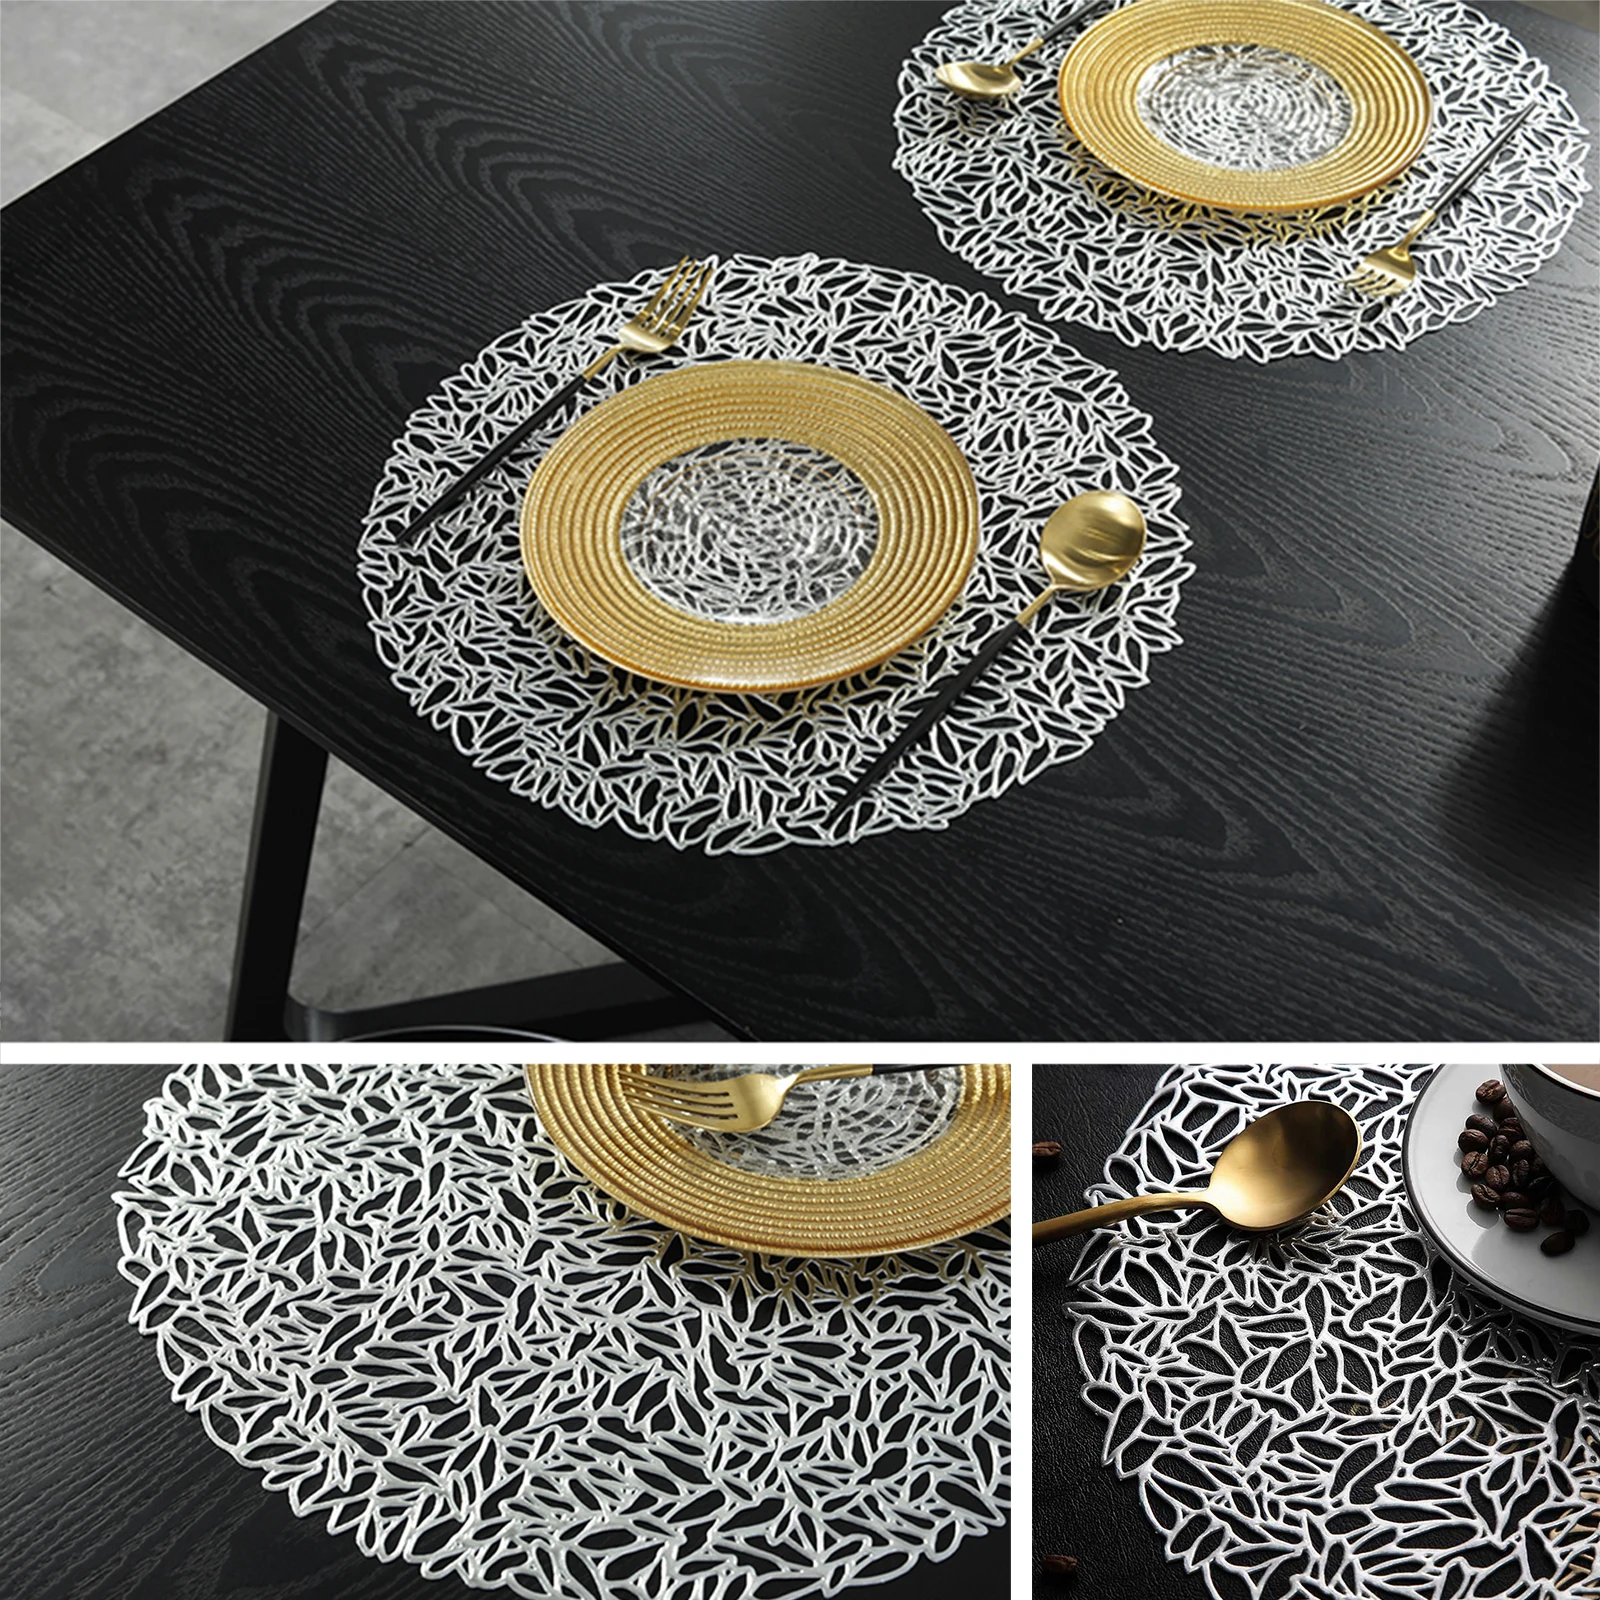 https://ae01.alicdn.com/kf/Sfba2a4abc8d14524b71a183b719647cb1/6-12-18-24-Pcs-Gold-Round-Placemats-Hollow-Out-Flowers-Place-Mats-Pressed-Vinyl-Metallic.jpg